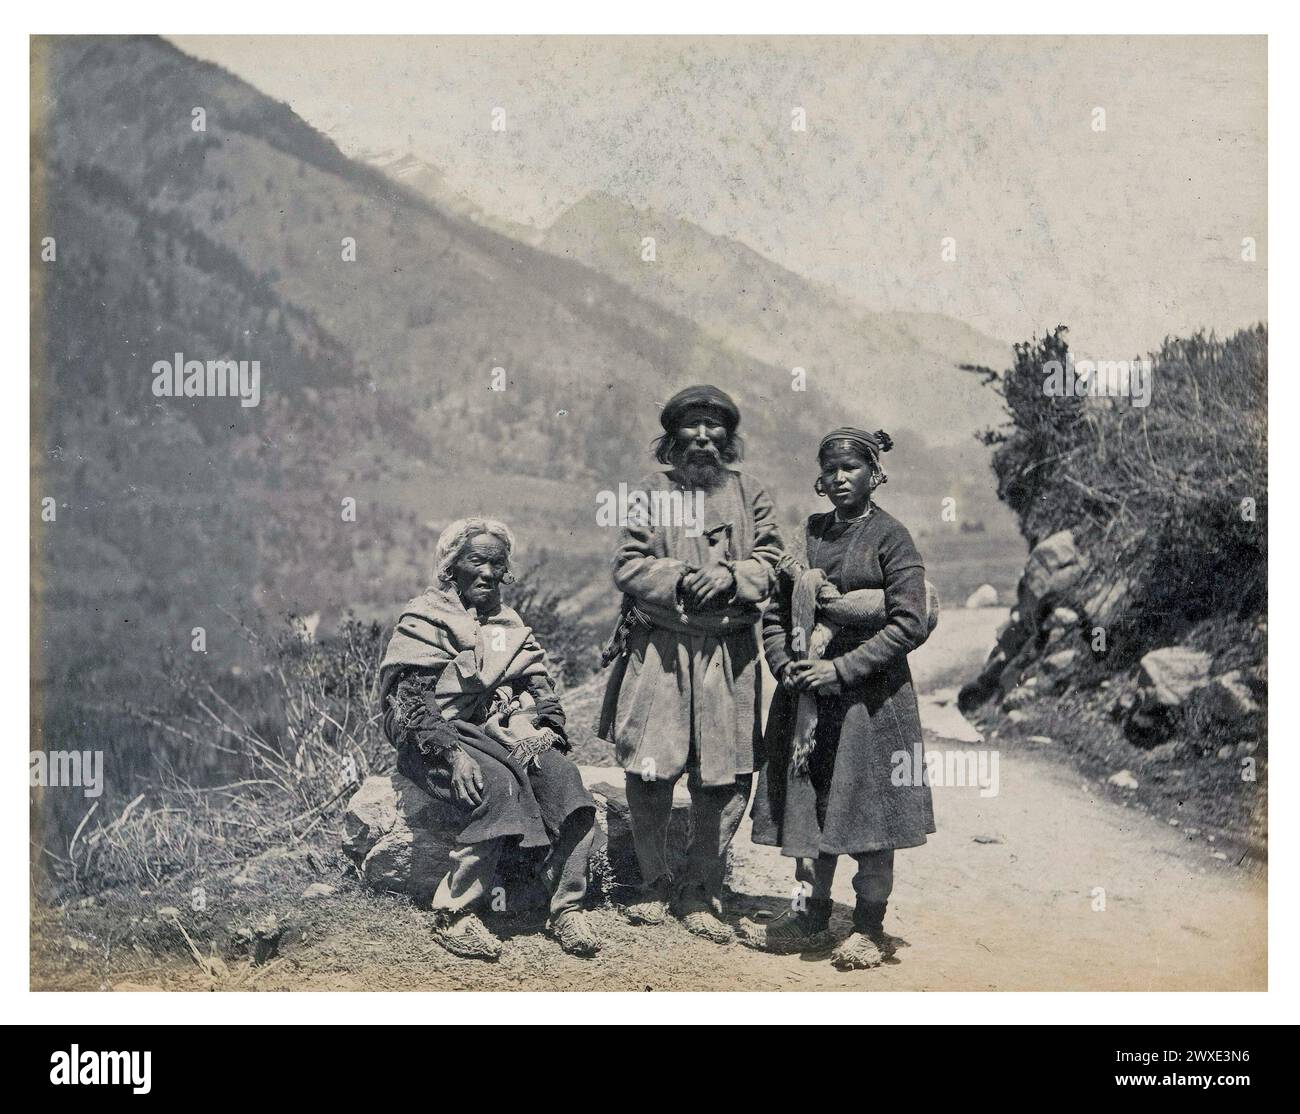 Antique photograph. Group portrait of three residents from Ladakh or Spiti in Kullu, Himachal Pradesh, India. Original title: 'Natives of Ladock' Likely photographed by Frank Mason Good. Published by Francis Frith & Co. Himachal Pradesh, India. 1869 - 1875 Stock Photo